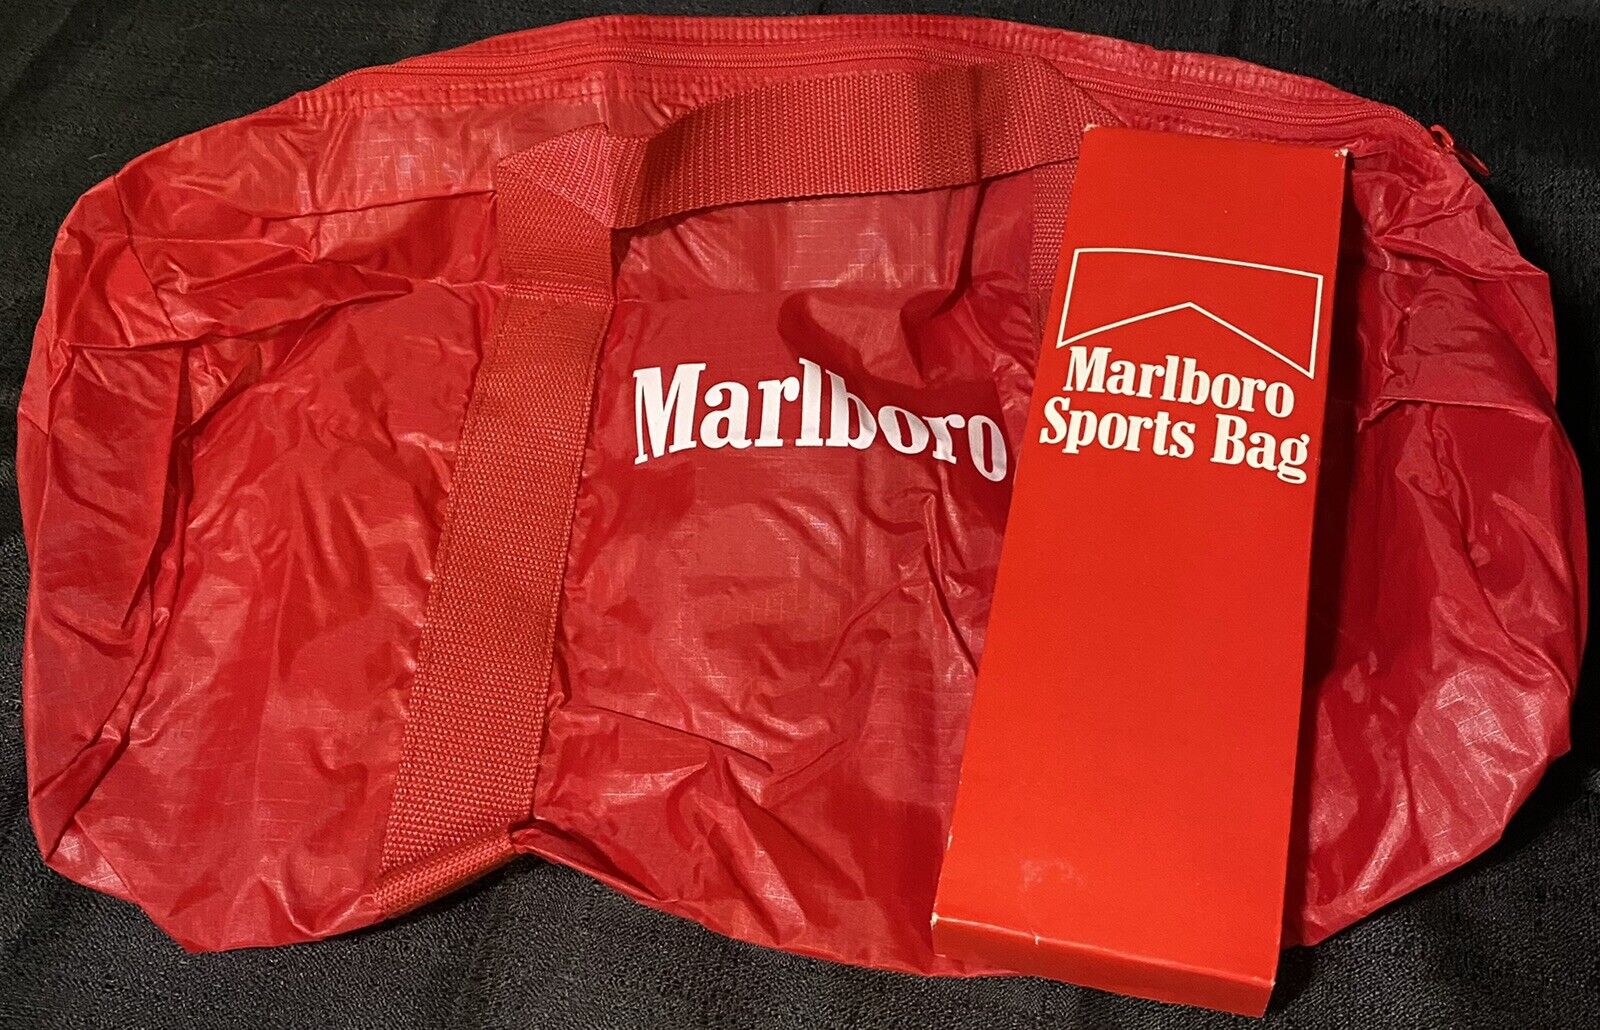 Vintage 1980s Marlboro Cigarettes Sports Bag Tyvek NEW Workout Carry On Duffle